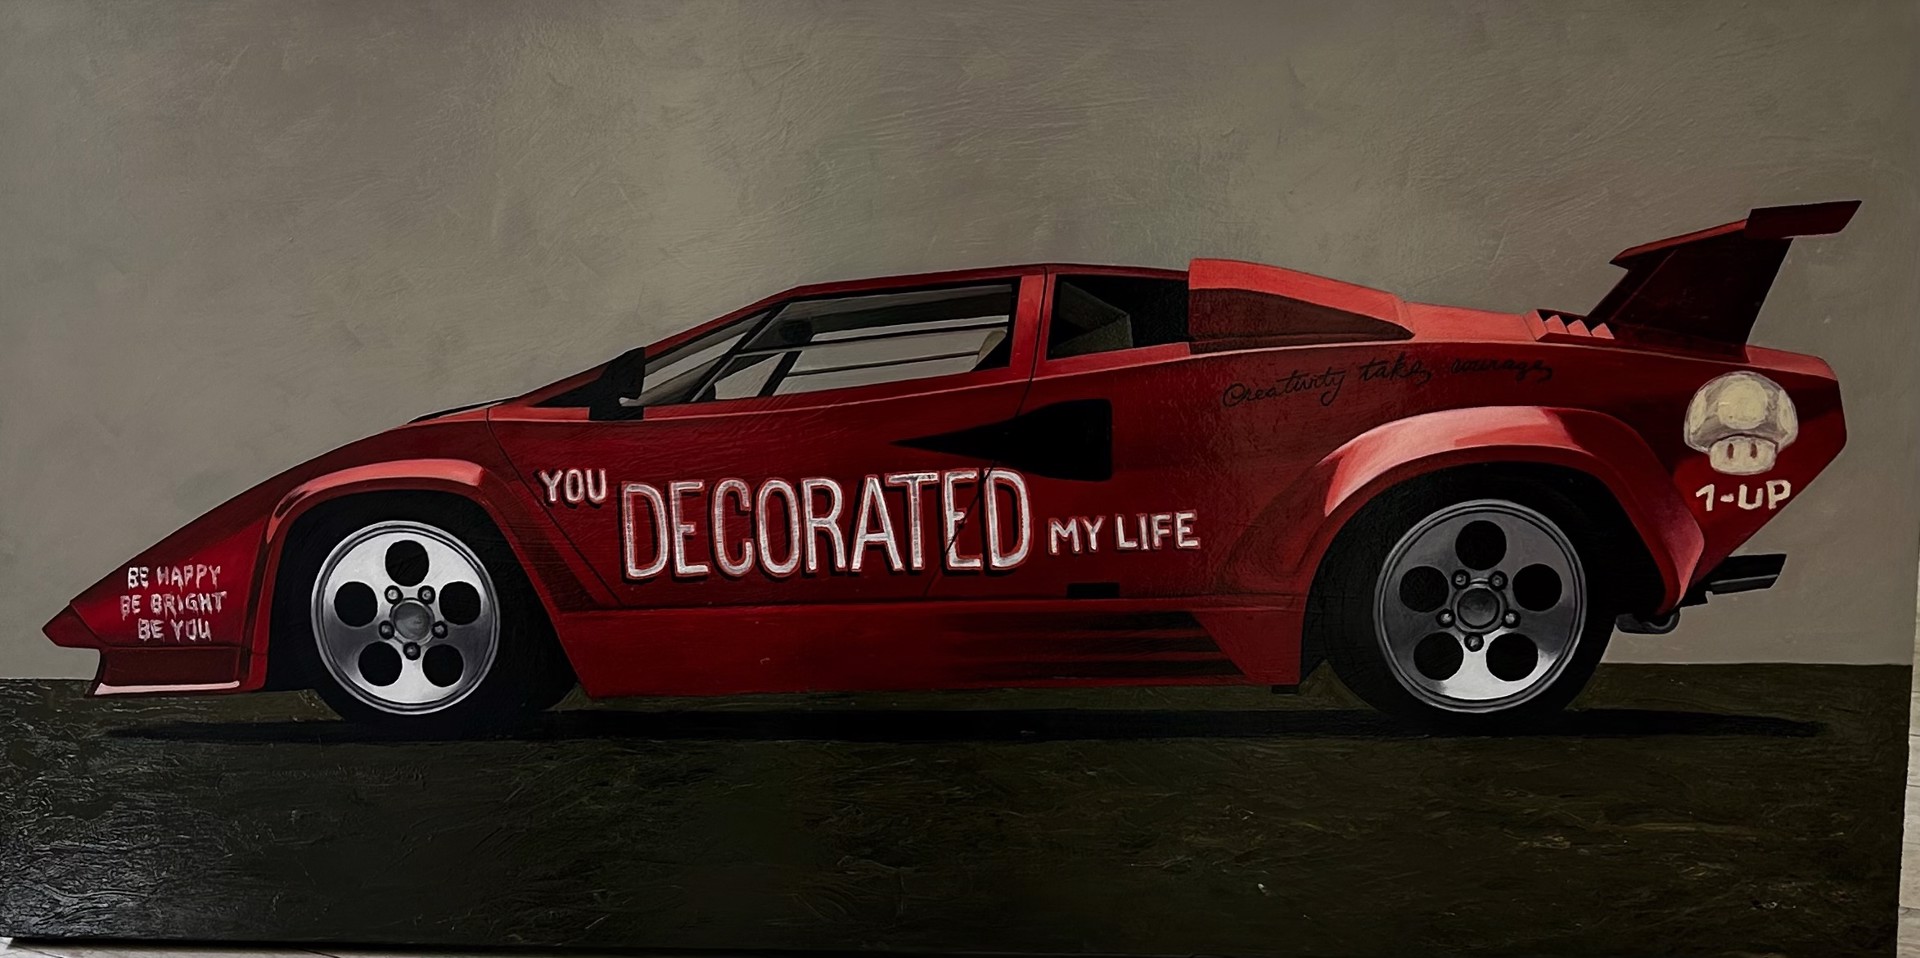 YOU DECORATED MY LIFE by Matthew Belval